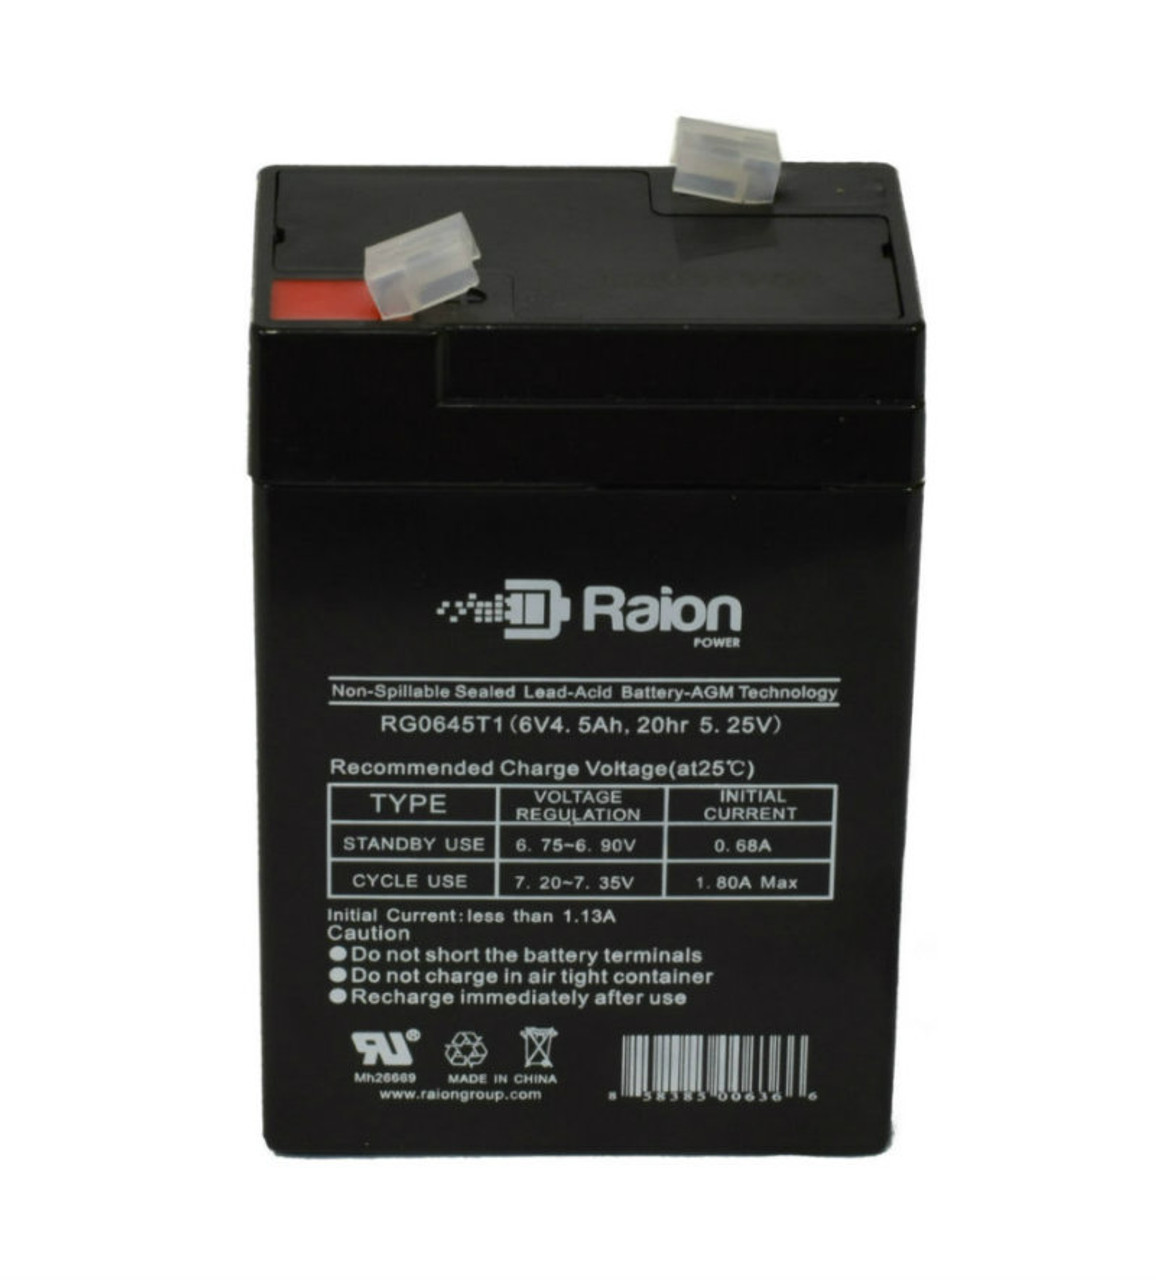 Raion Power RG0645T1 Replacement Battery Cartridge for Chiway SJ6V4Ah